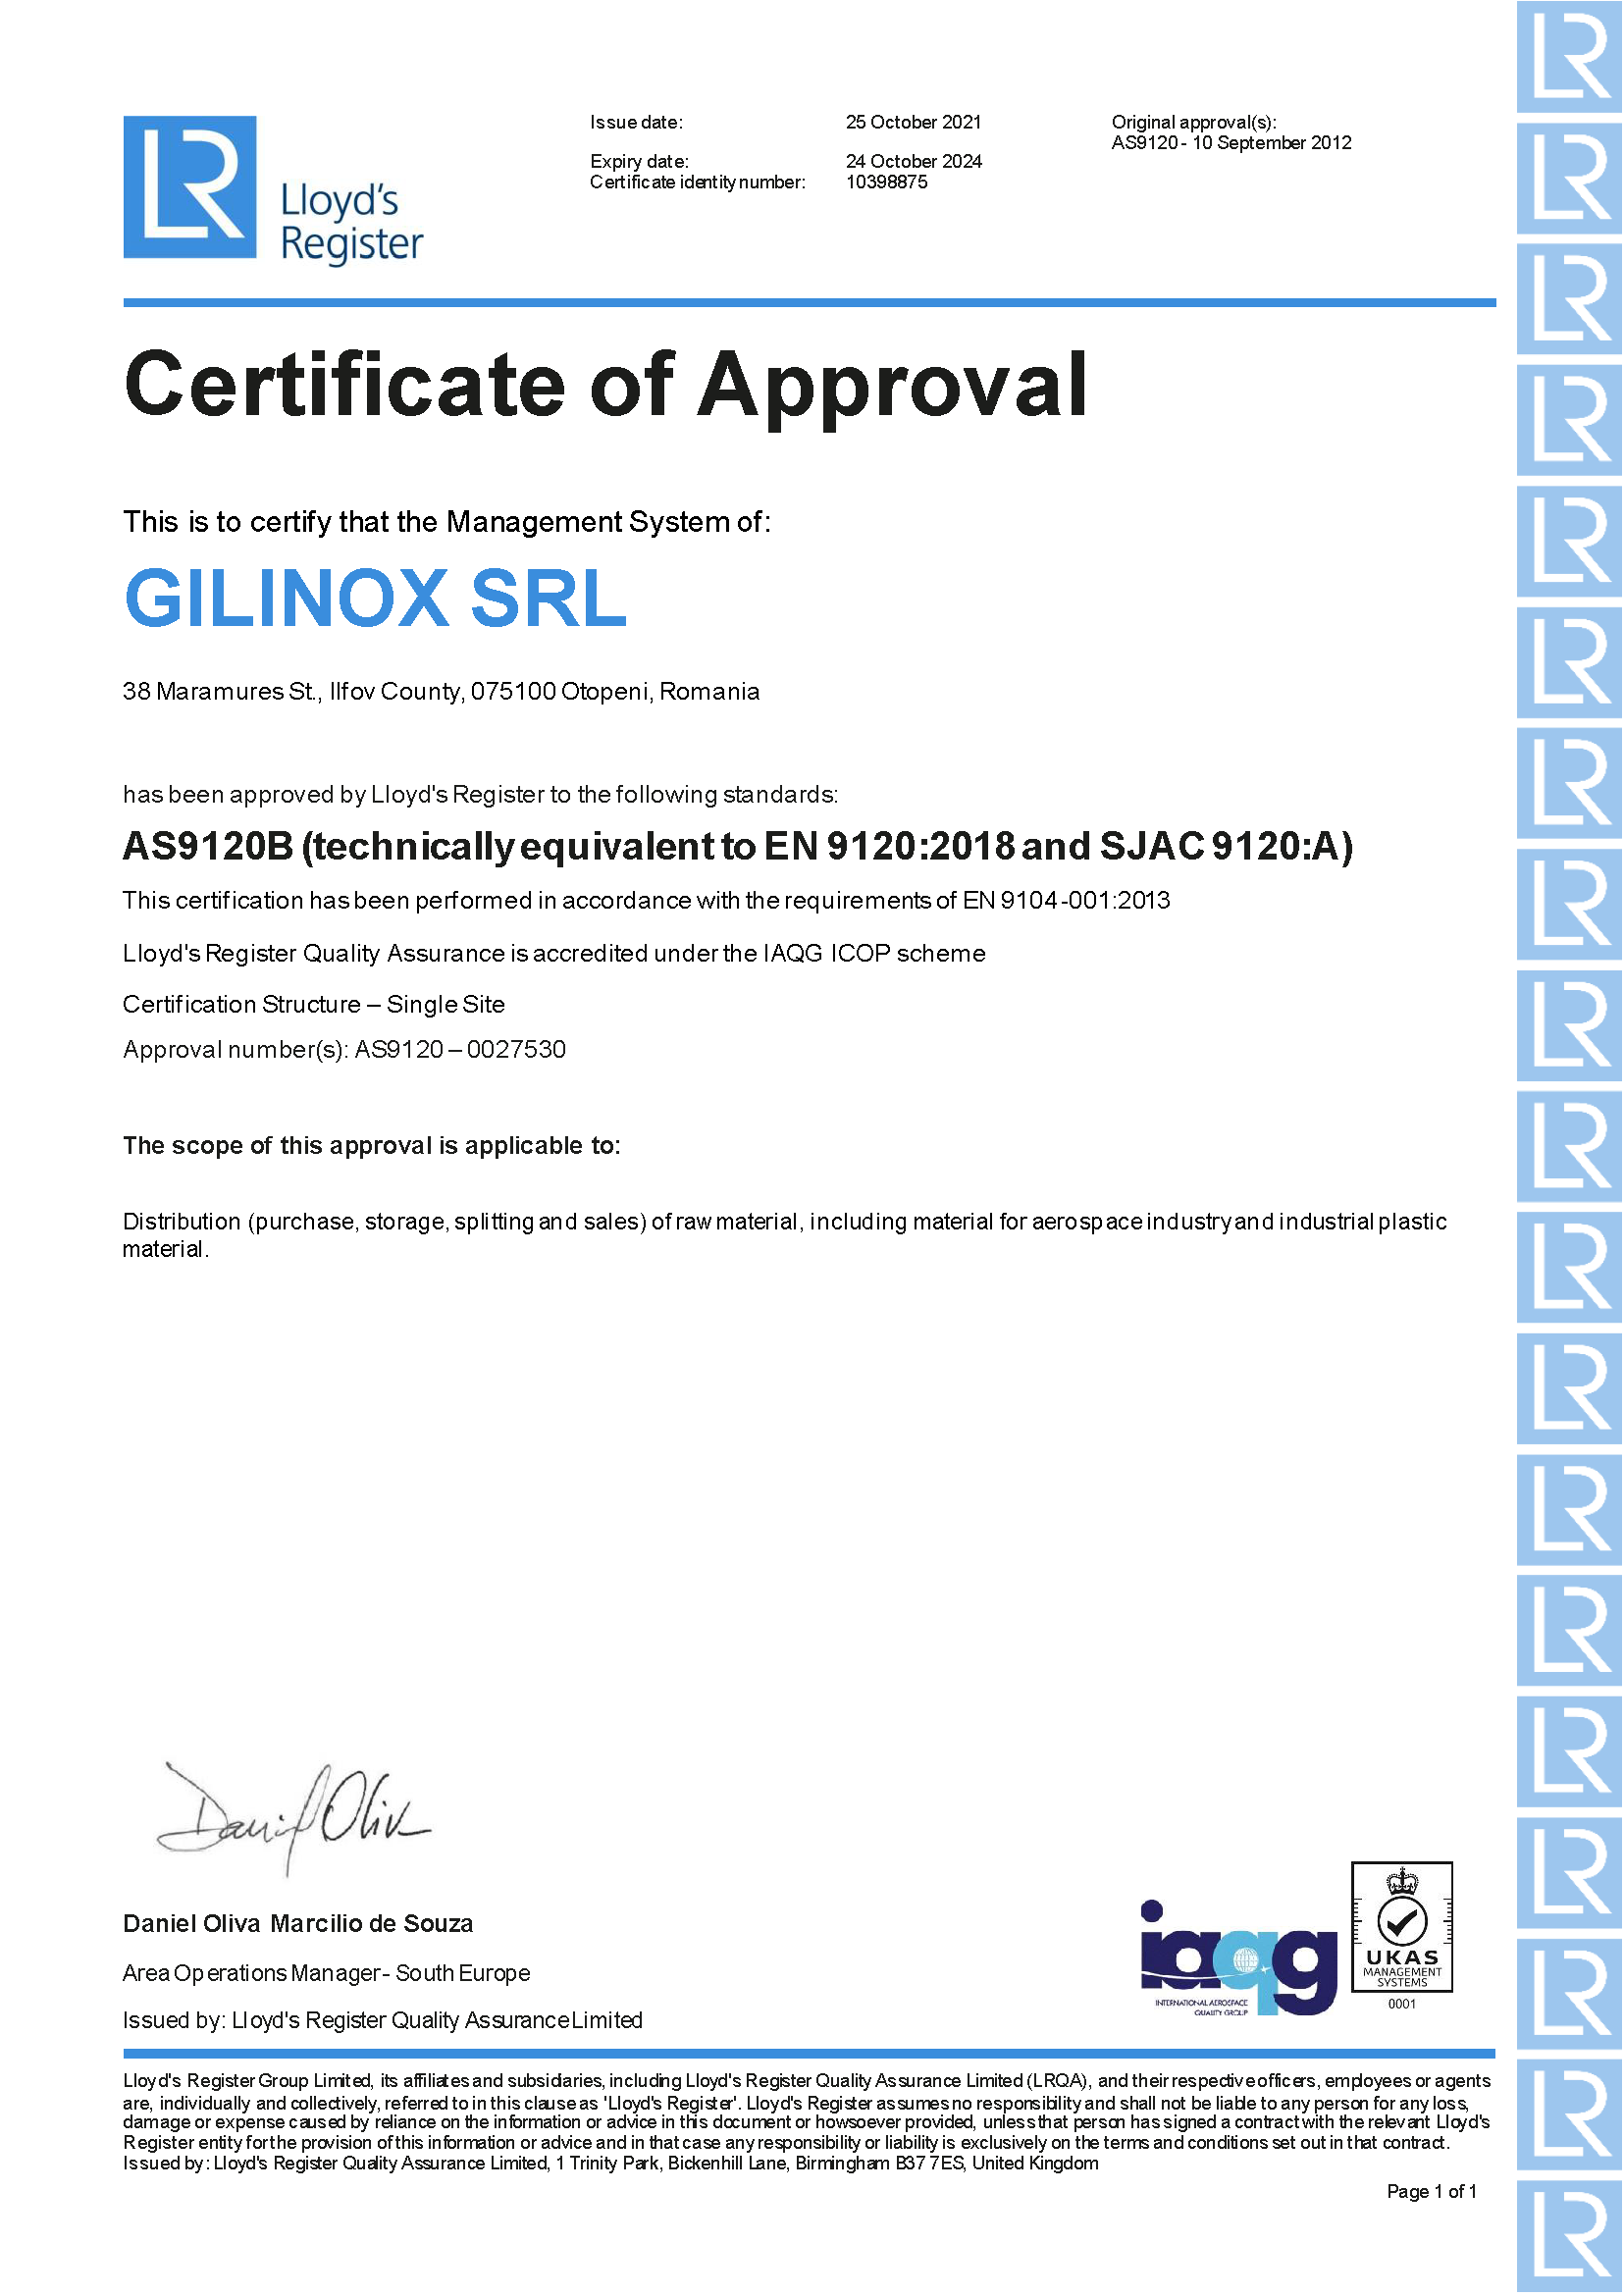 Certificate AS 9120B (technically equivalent to EN 9120:2018 and SJAC 9120:A)